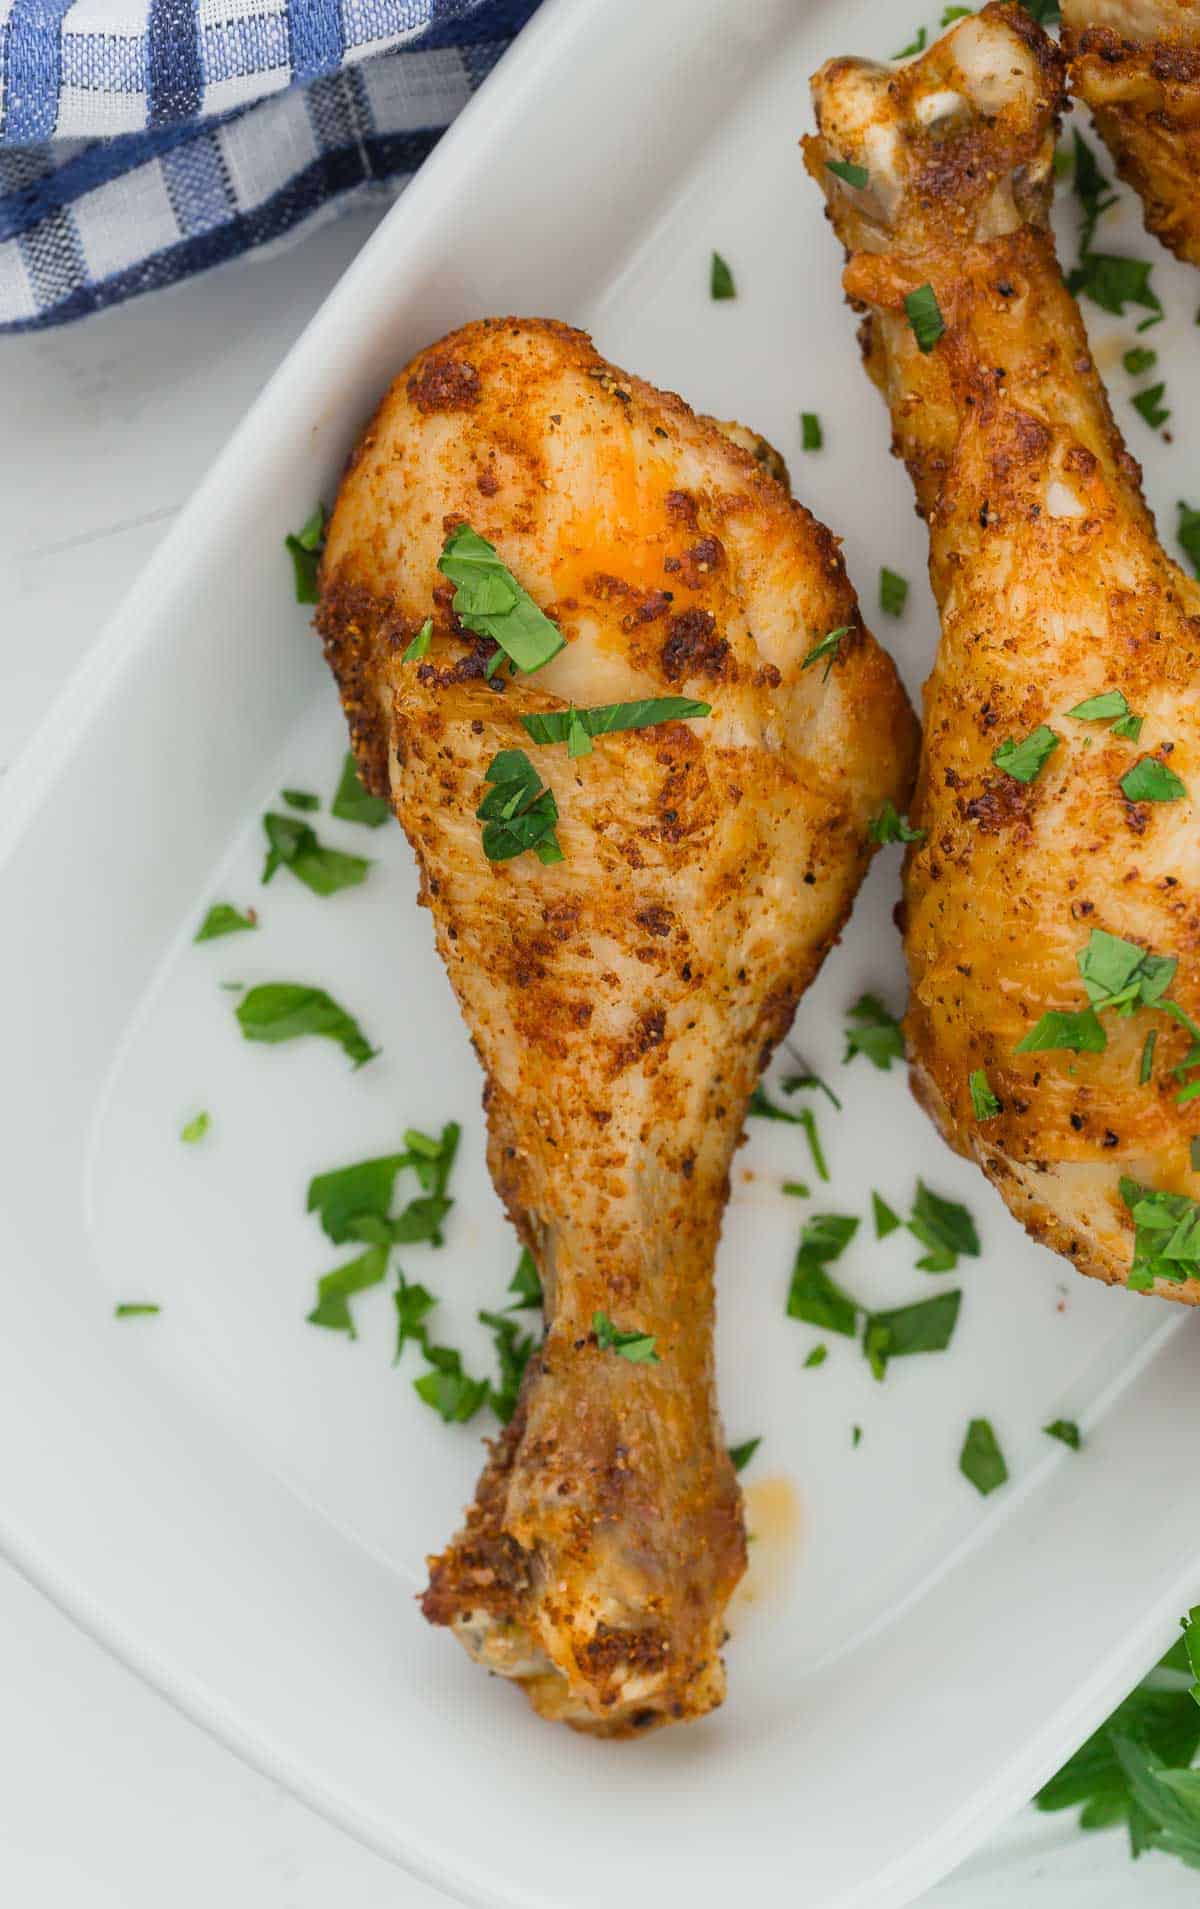 Overhead view of a chicken drumstick on a white plate, sprinkled with fresh parsley.